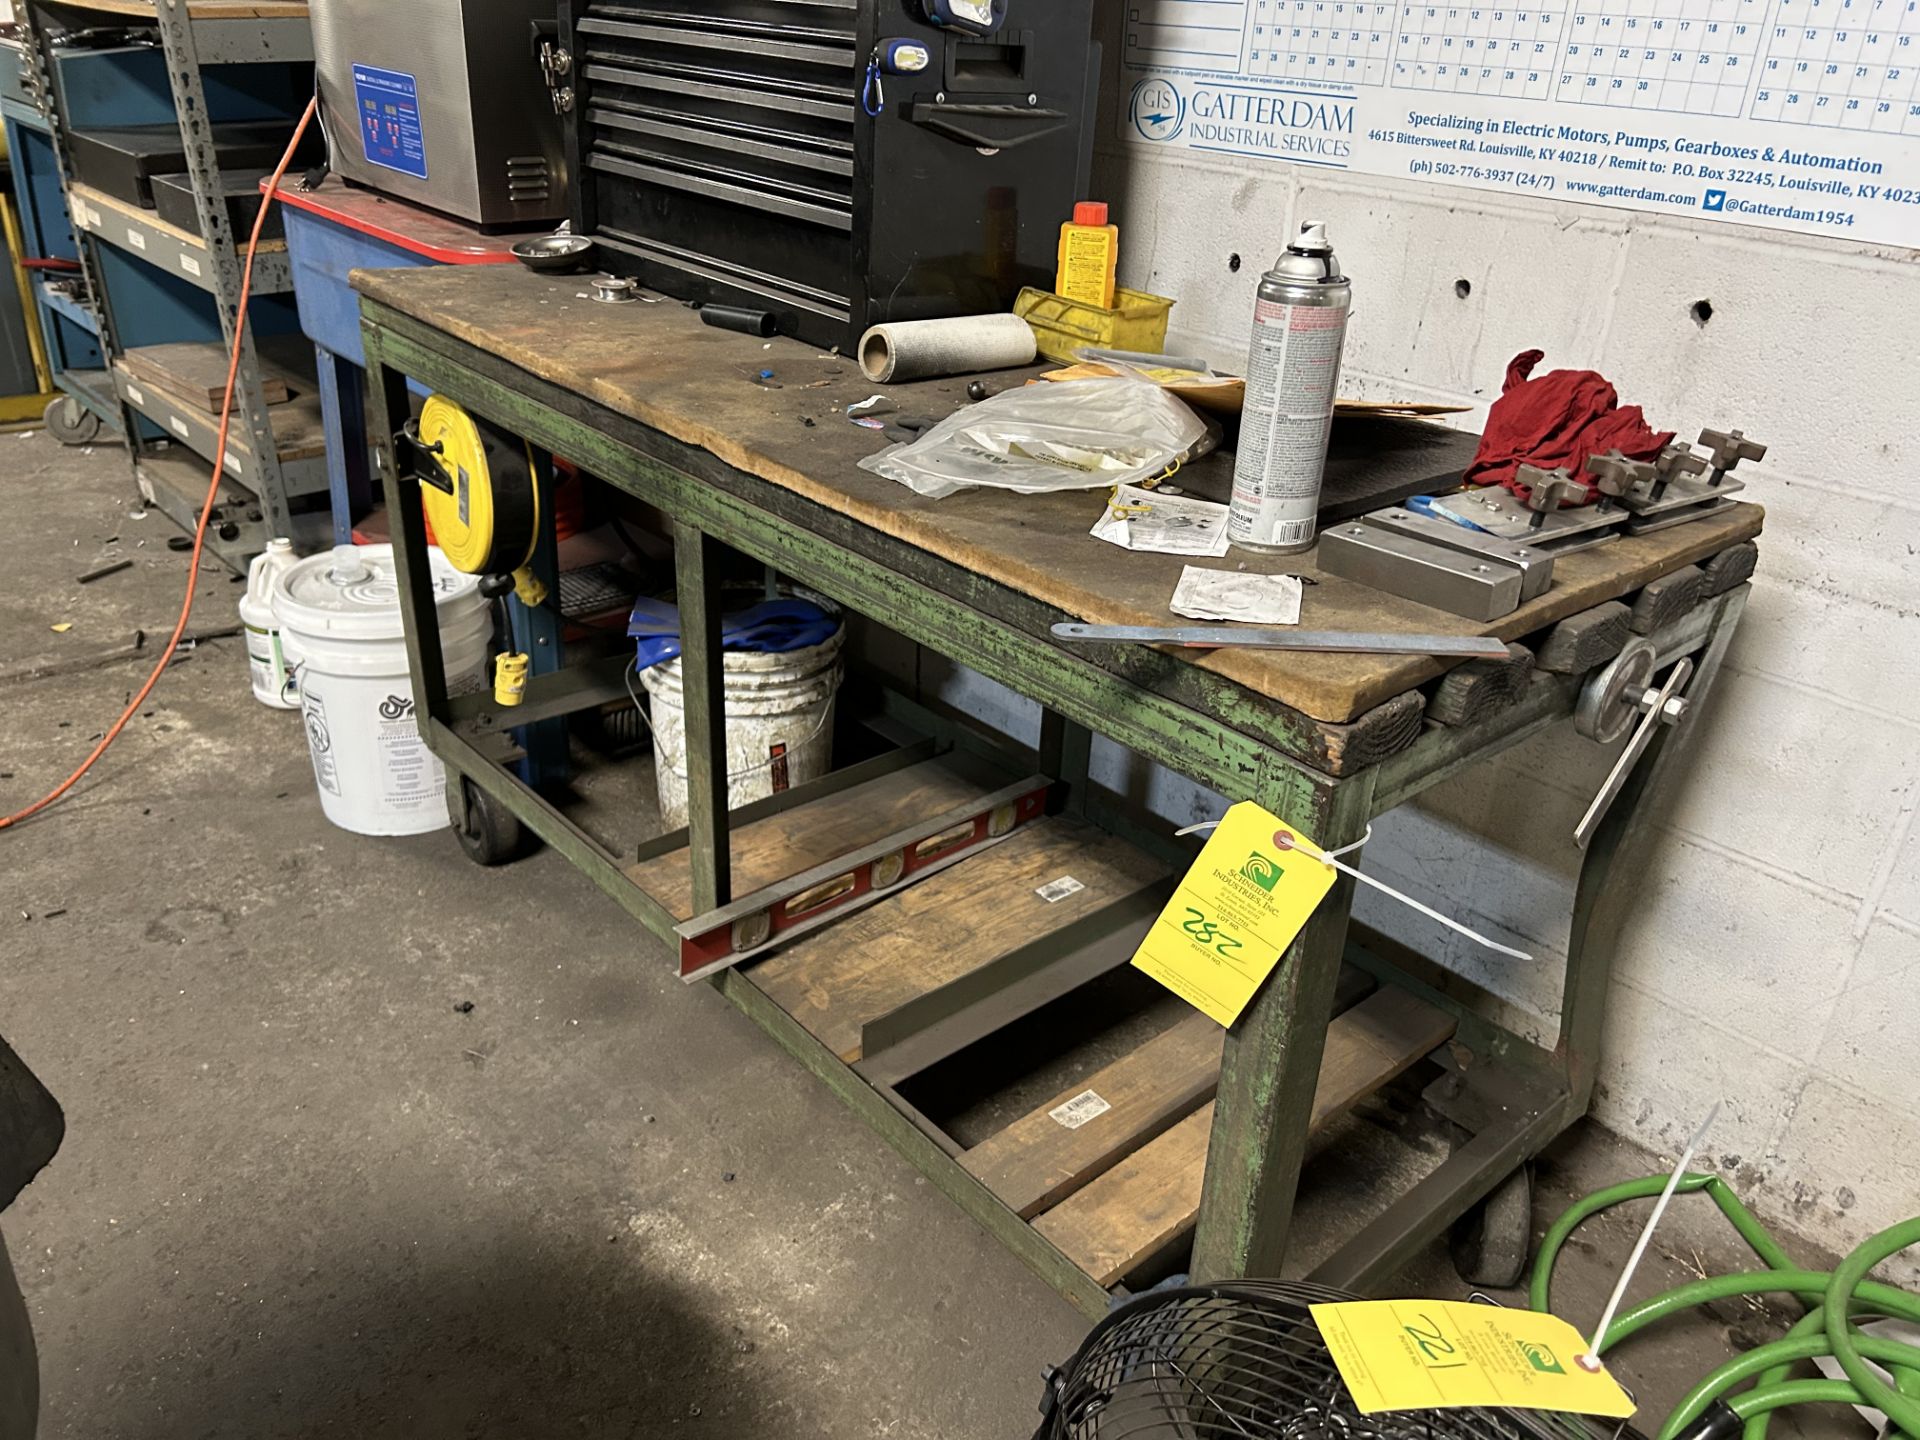 Shop Table, Includes Bayco Reel, (No Contents), Rigging/Loading Fee: $25